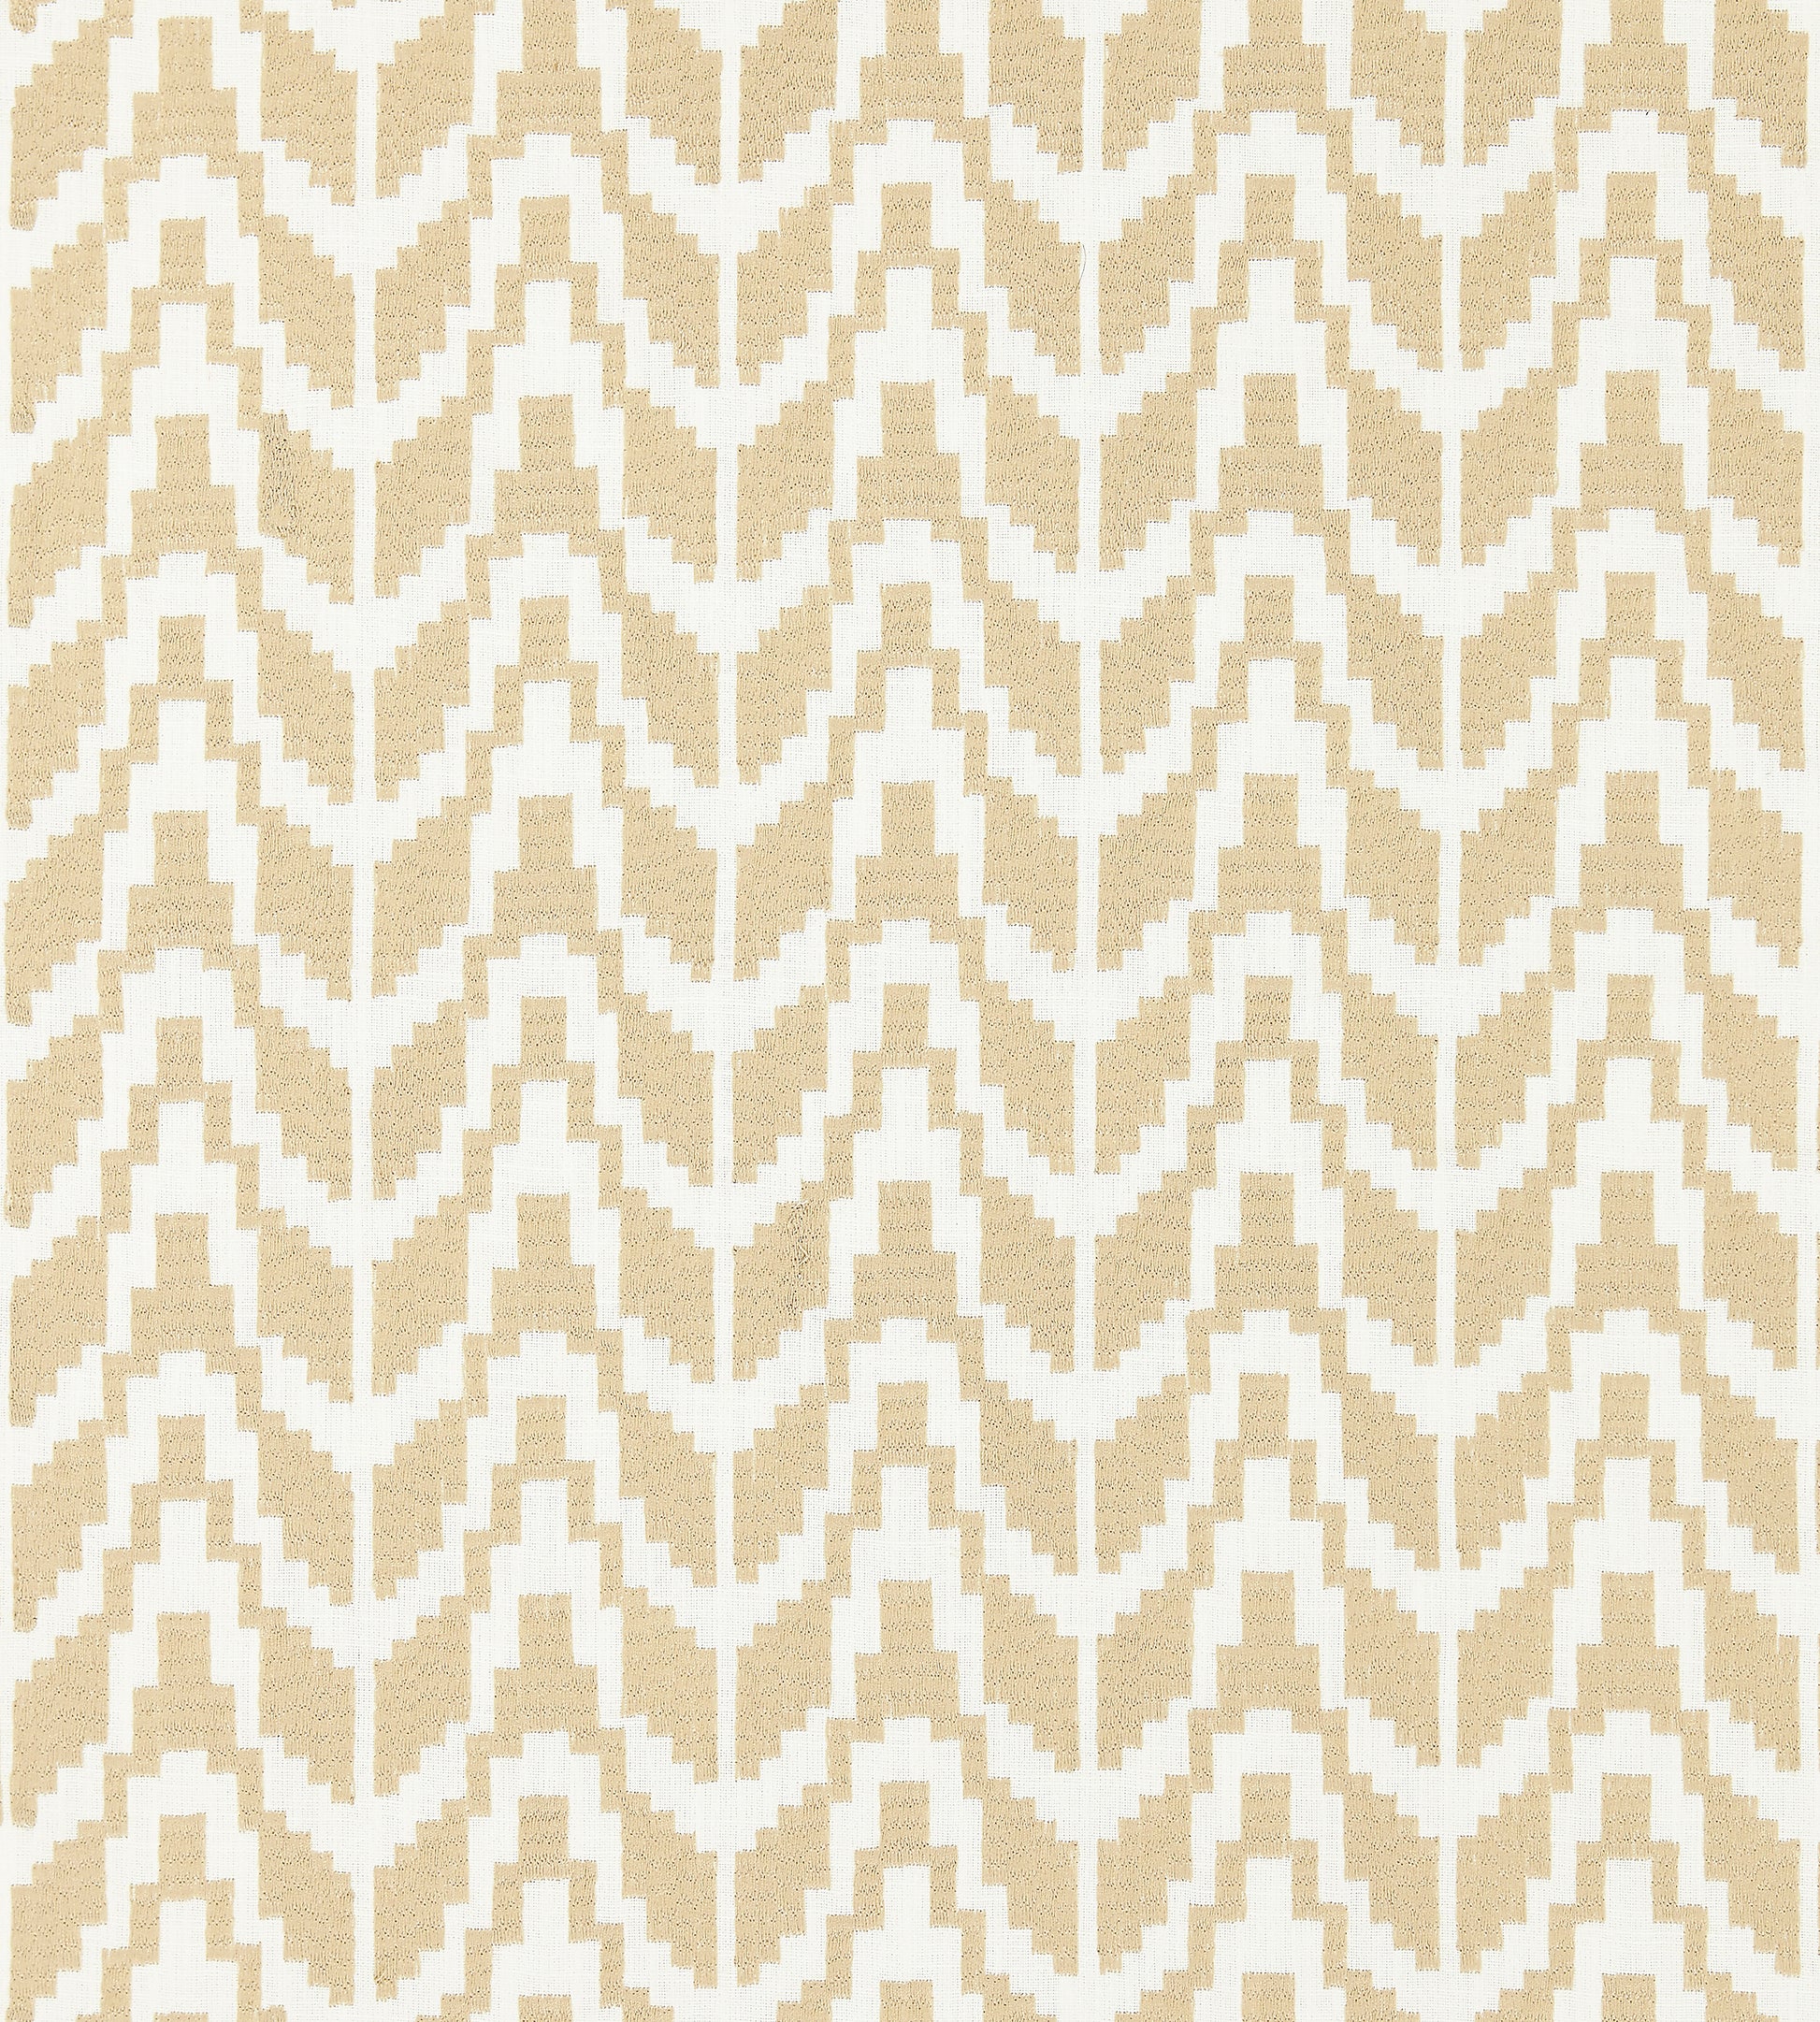 Purchase Scalamandre Fabric Pattern number SC 000127103, Chevron Embroidery Straw 1